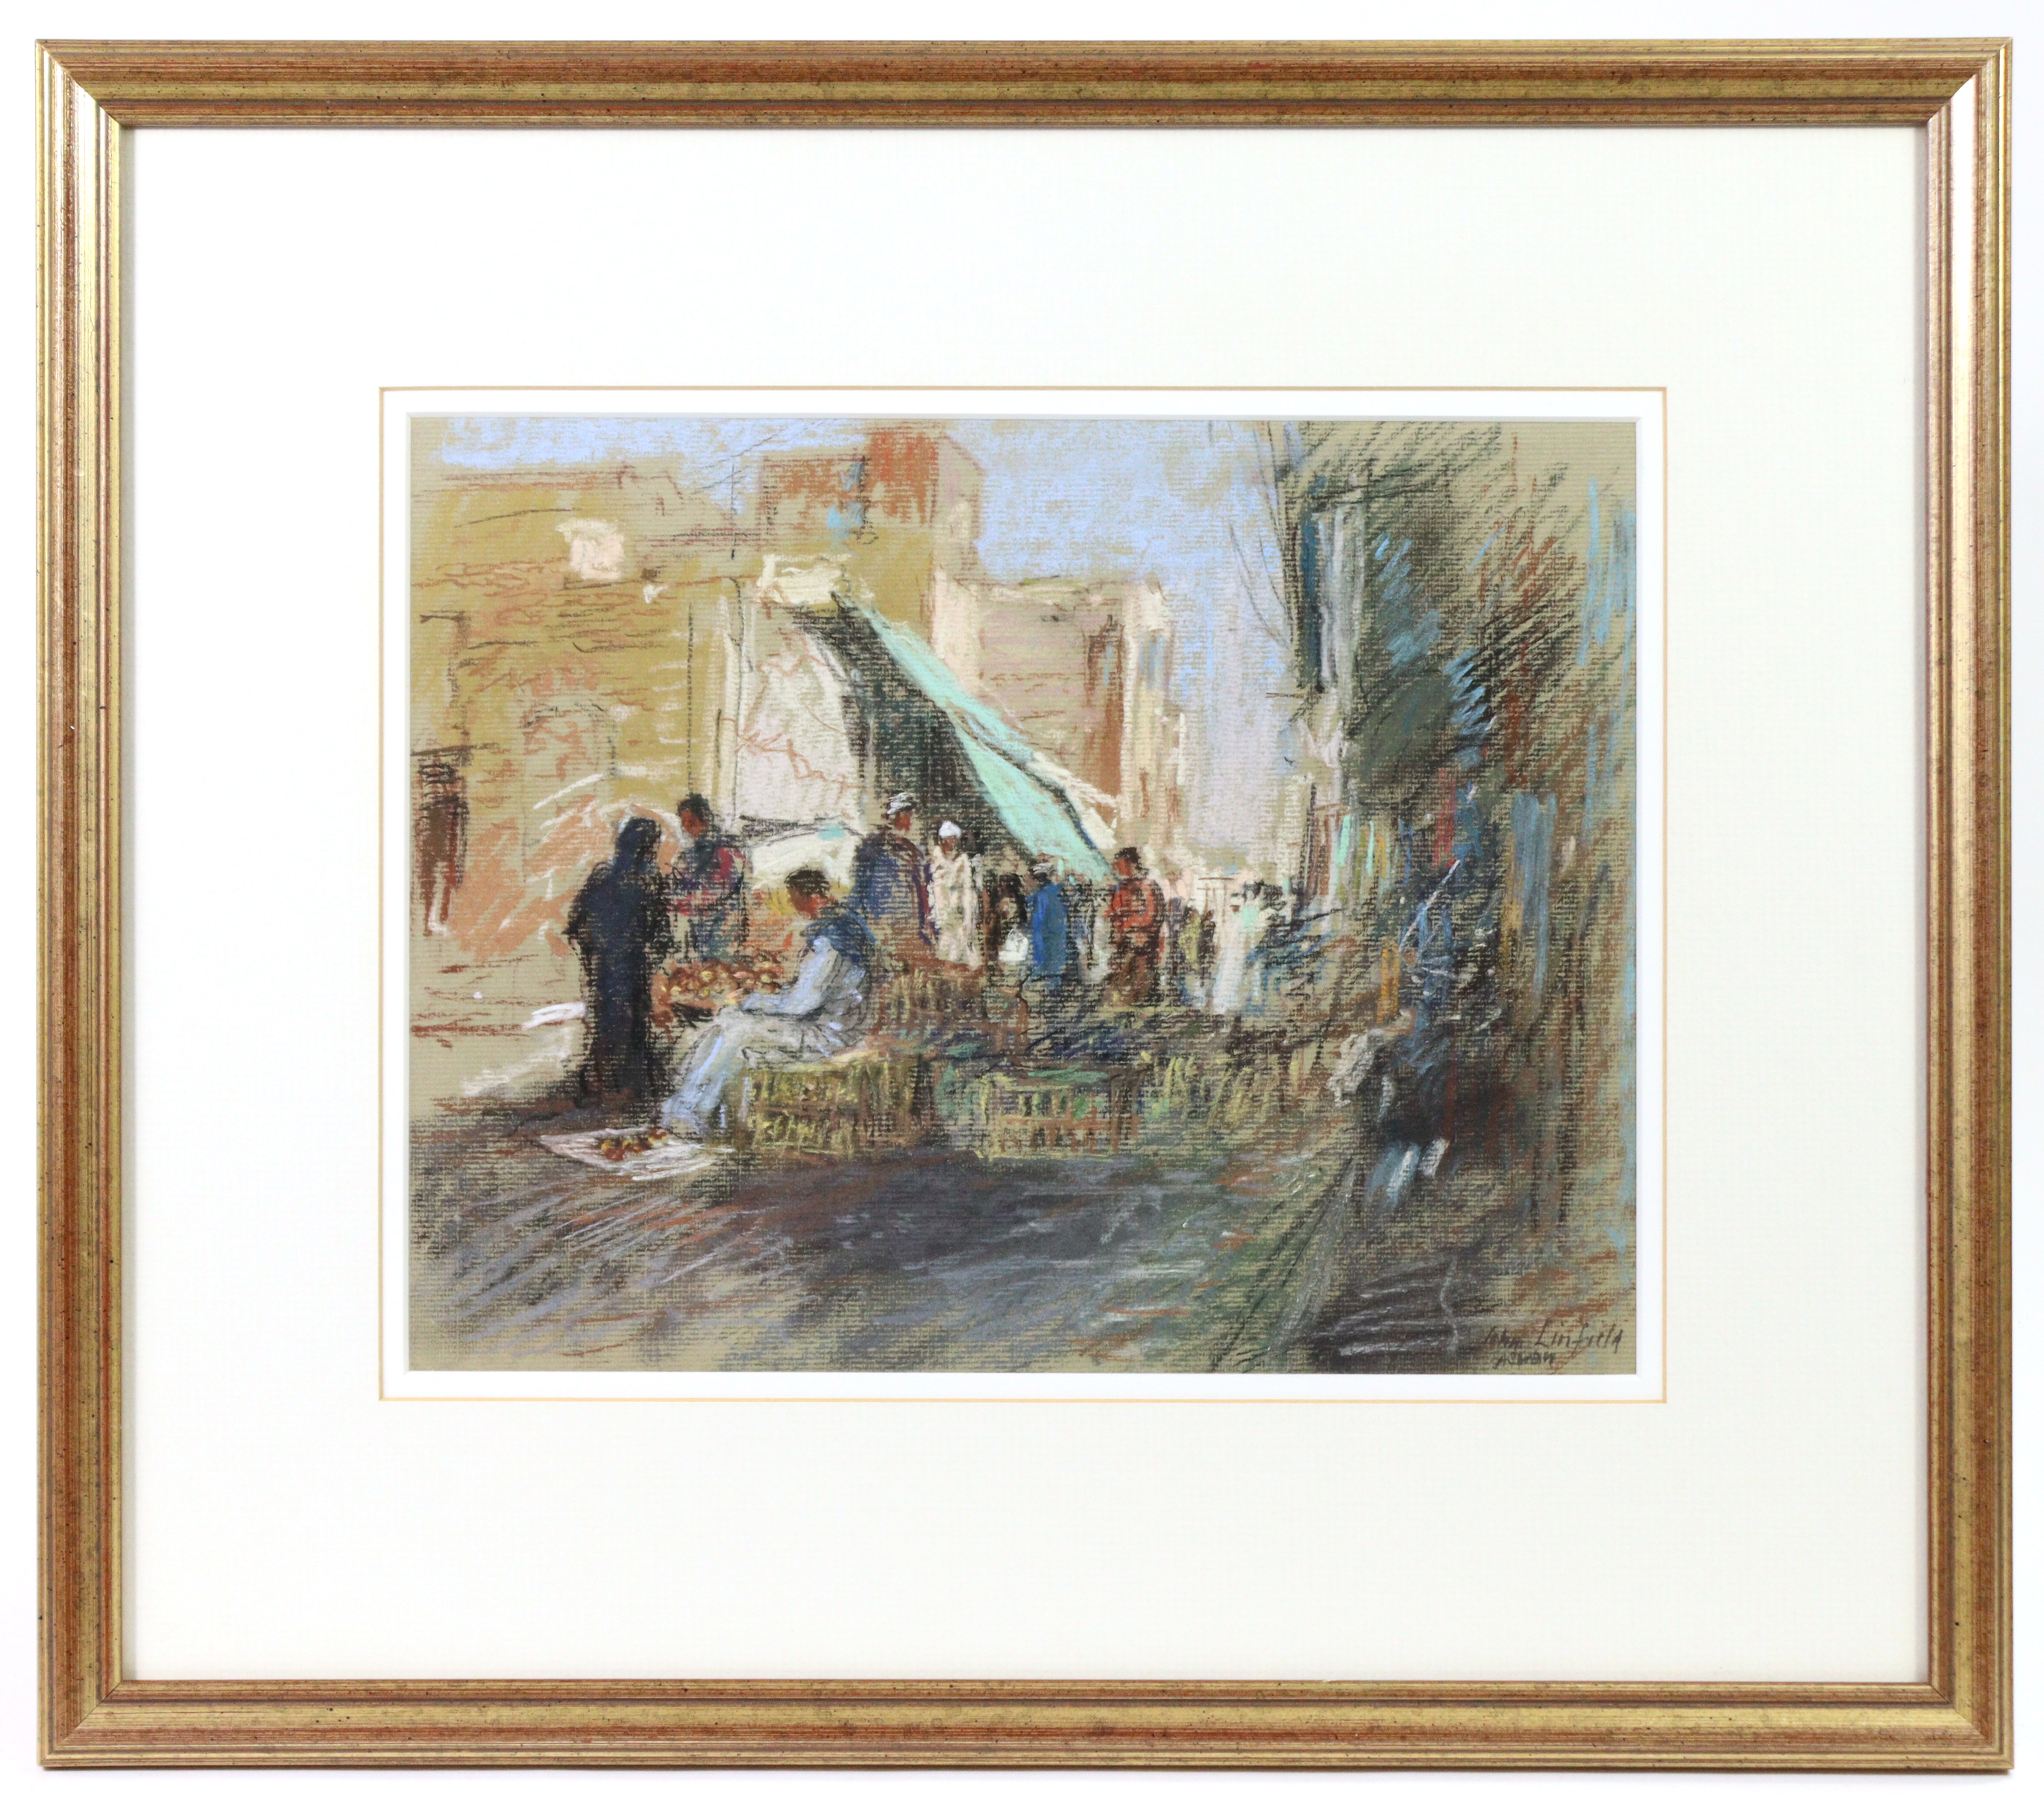 JOHN LINFIELD, R.W.S., N.E.A.C. (b. 1930). “Sorting Potatoes, Aswan Market”. Signed & inscribed “ - Image 2 of 4